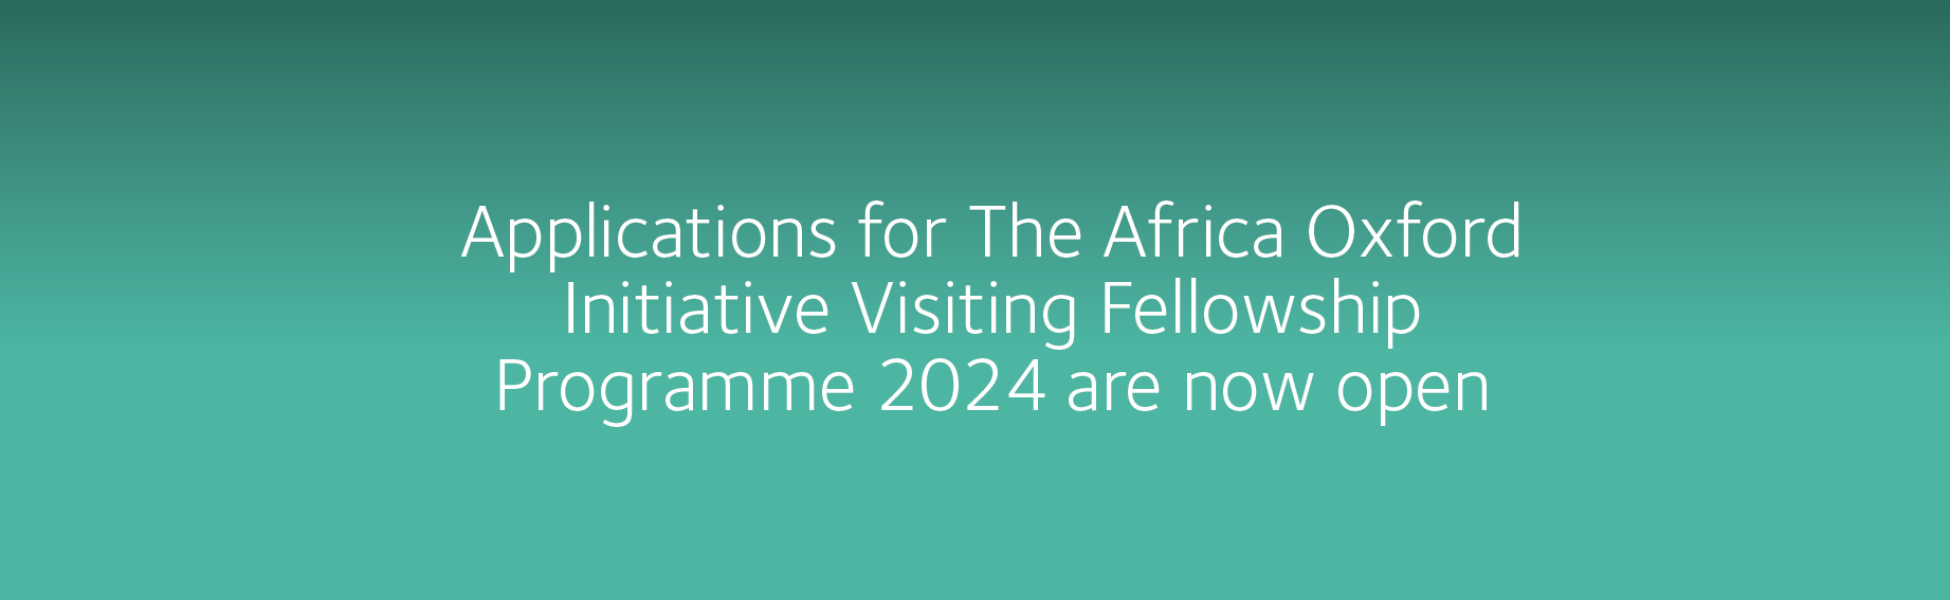 Applications for the Africa Oxford Initiative visiting Fellowship programme 2024 are now open 